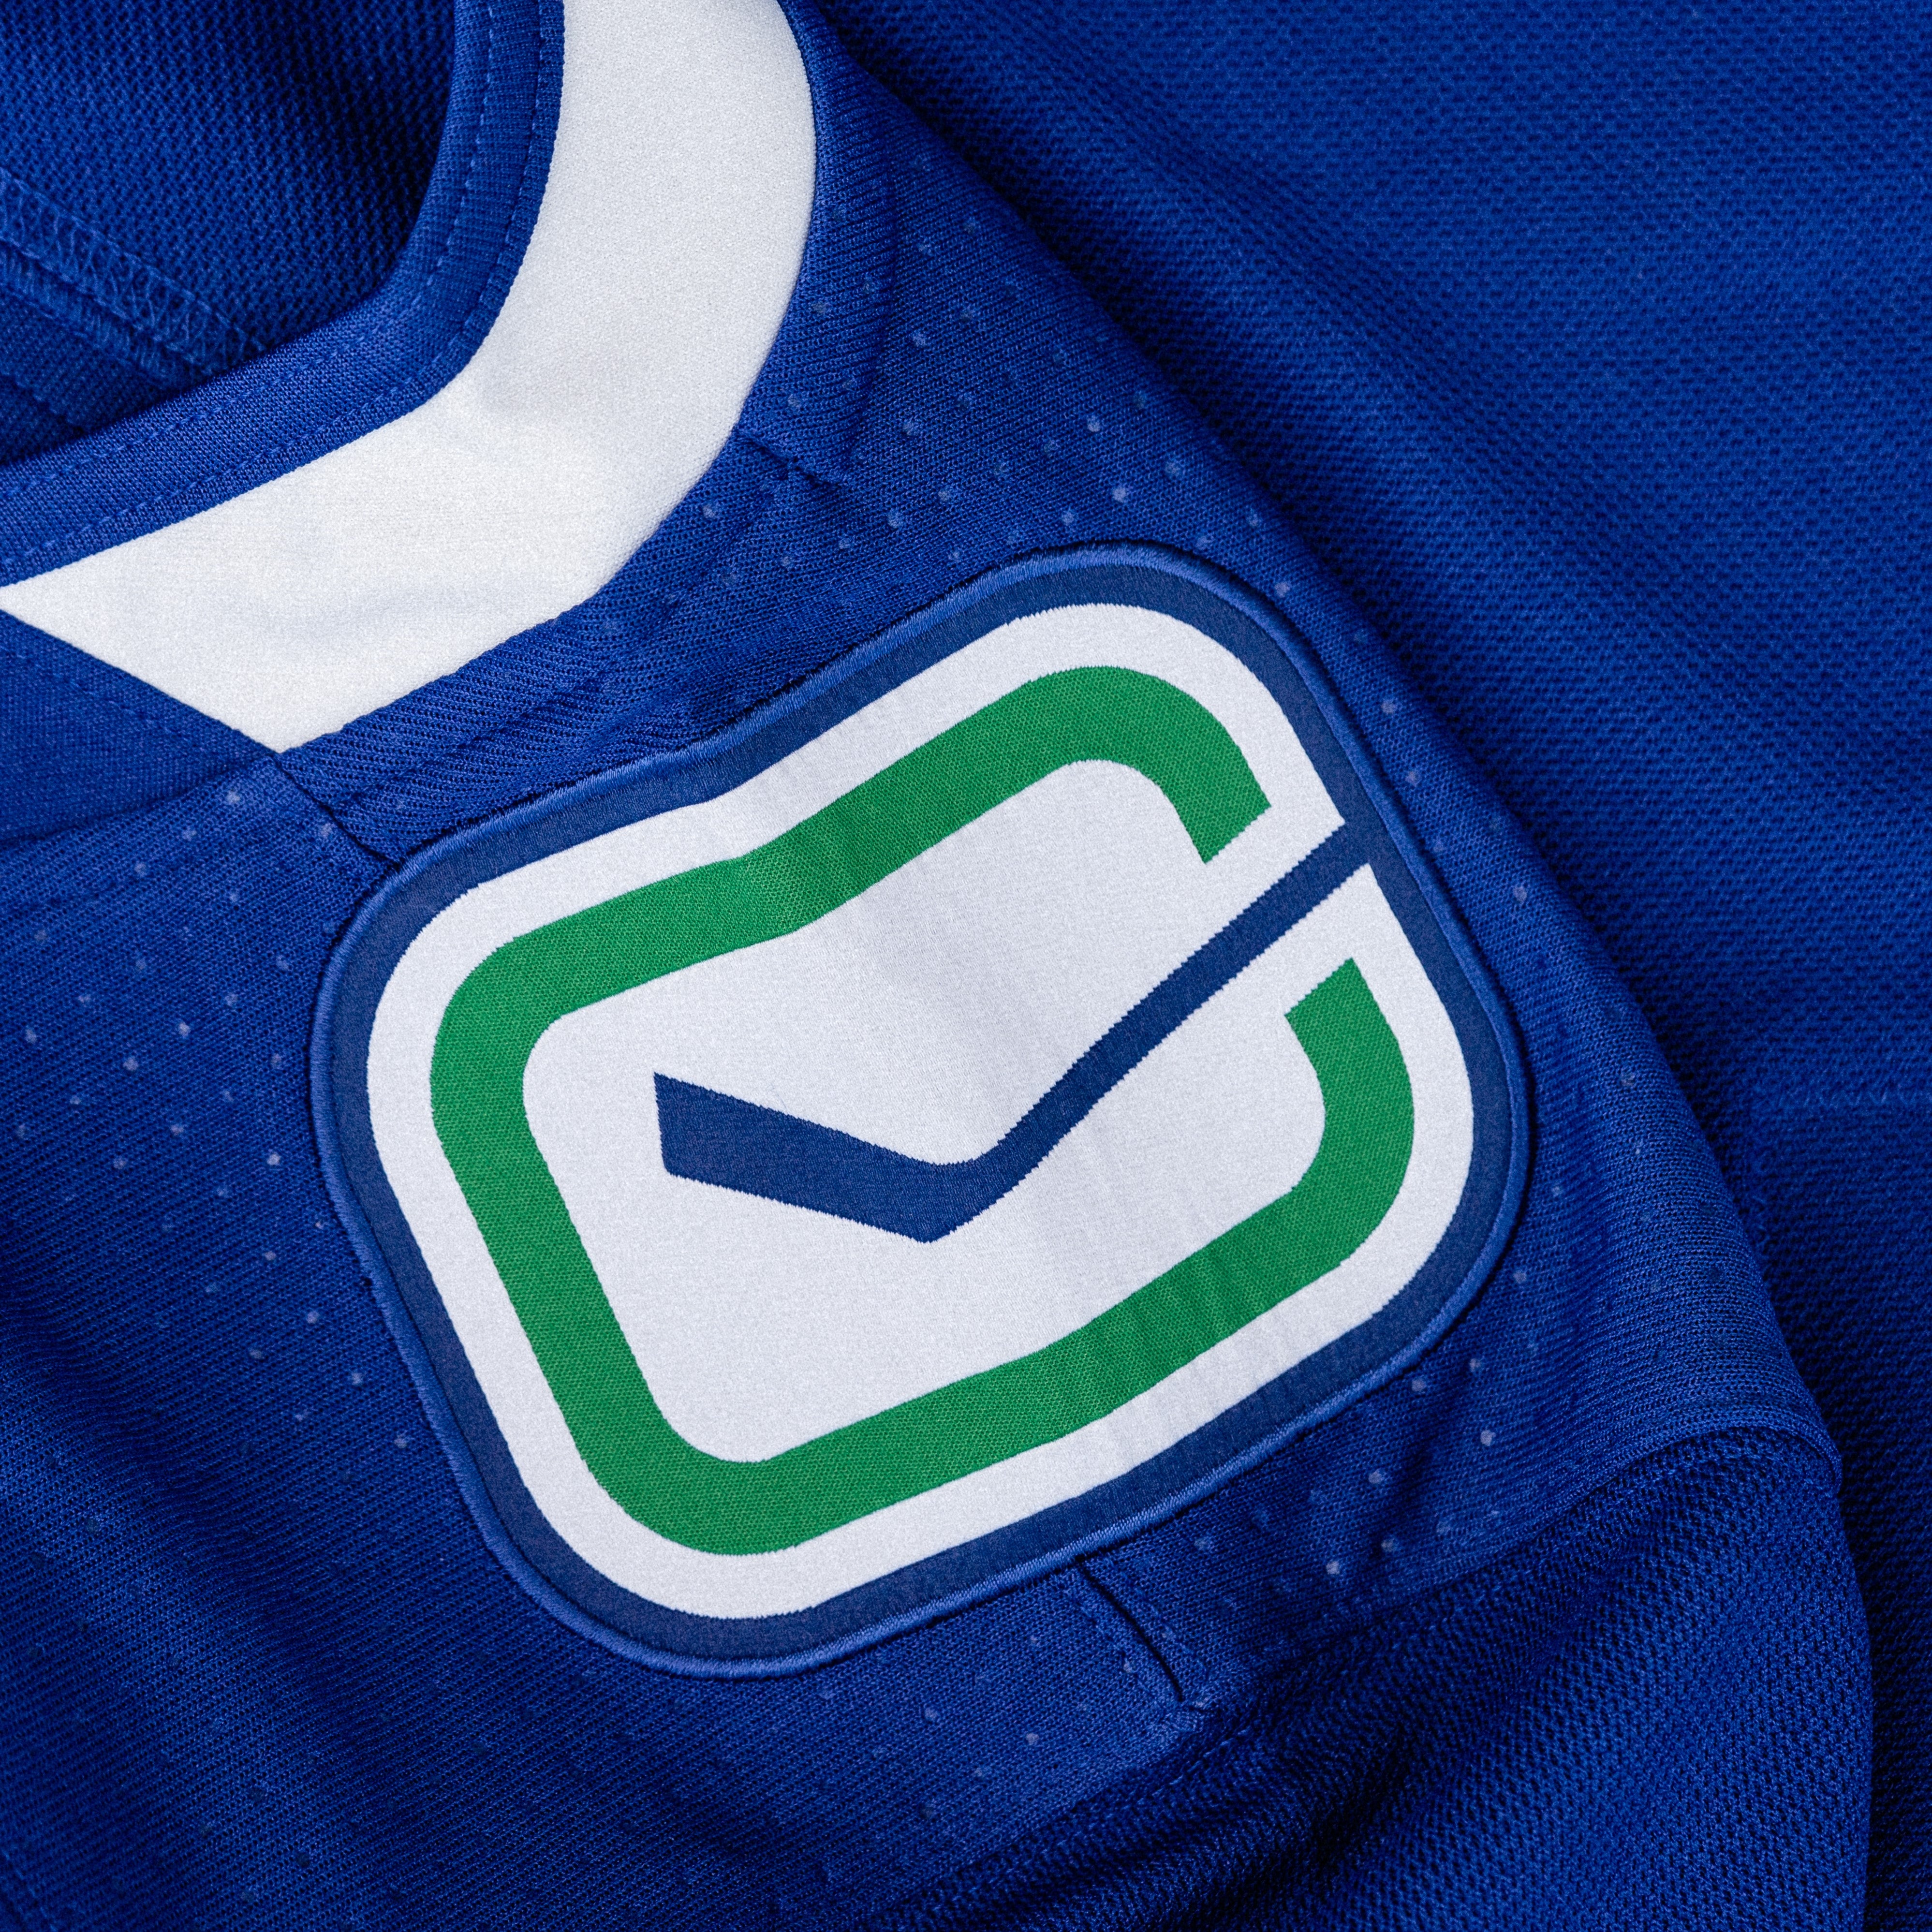 Adidas Authentic Vancouver Canucks Home Jersey